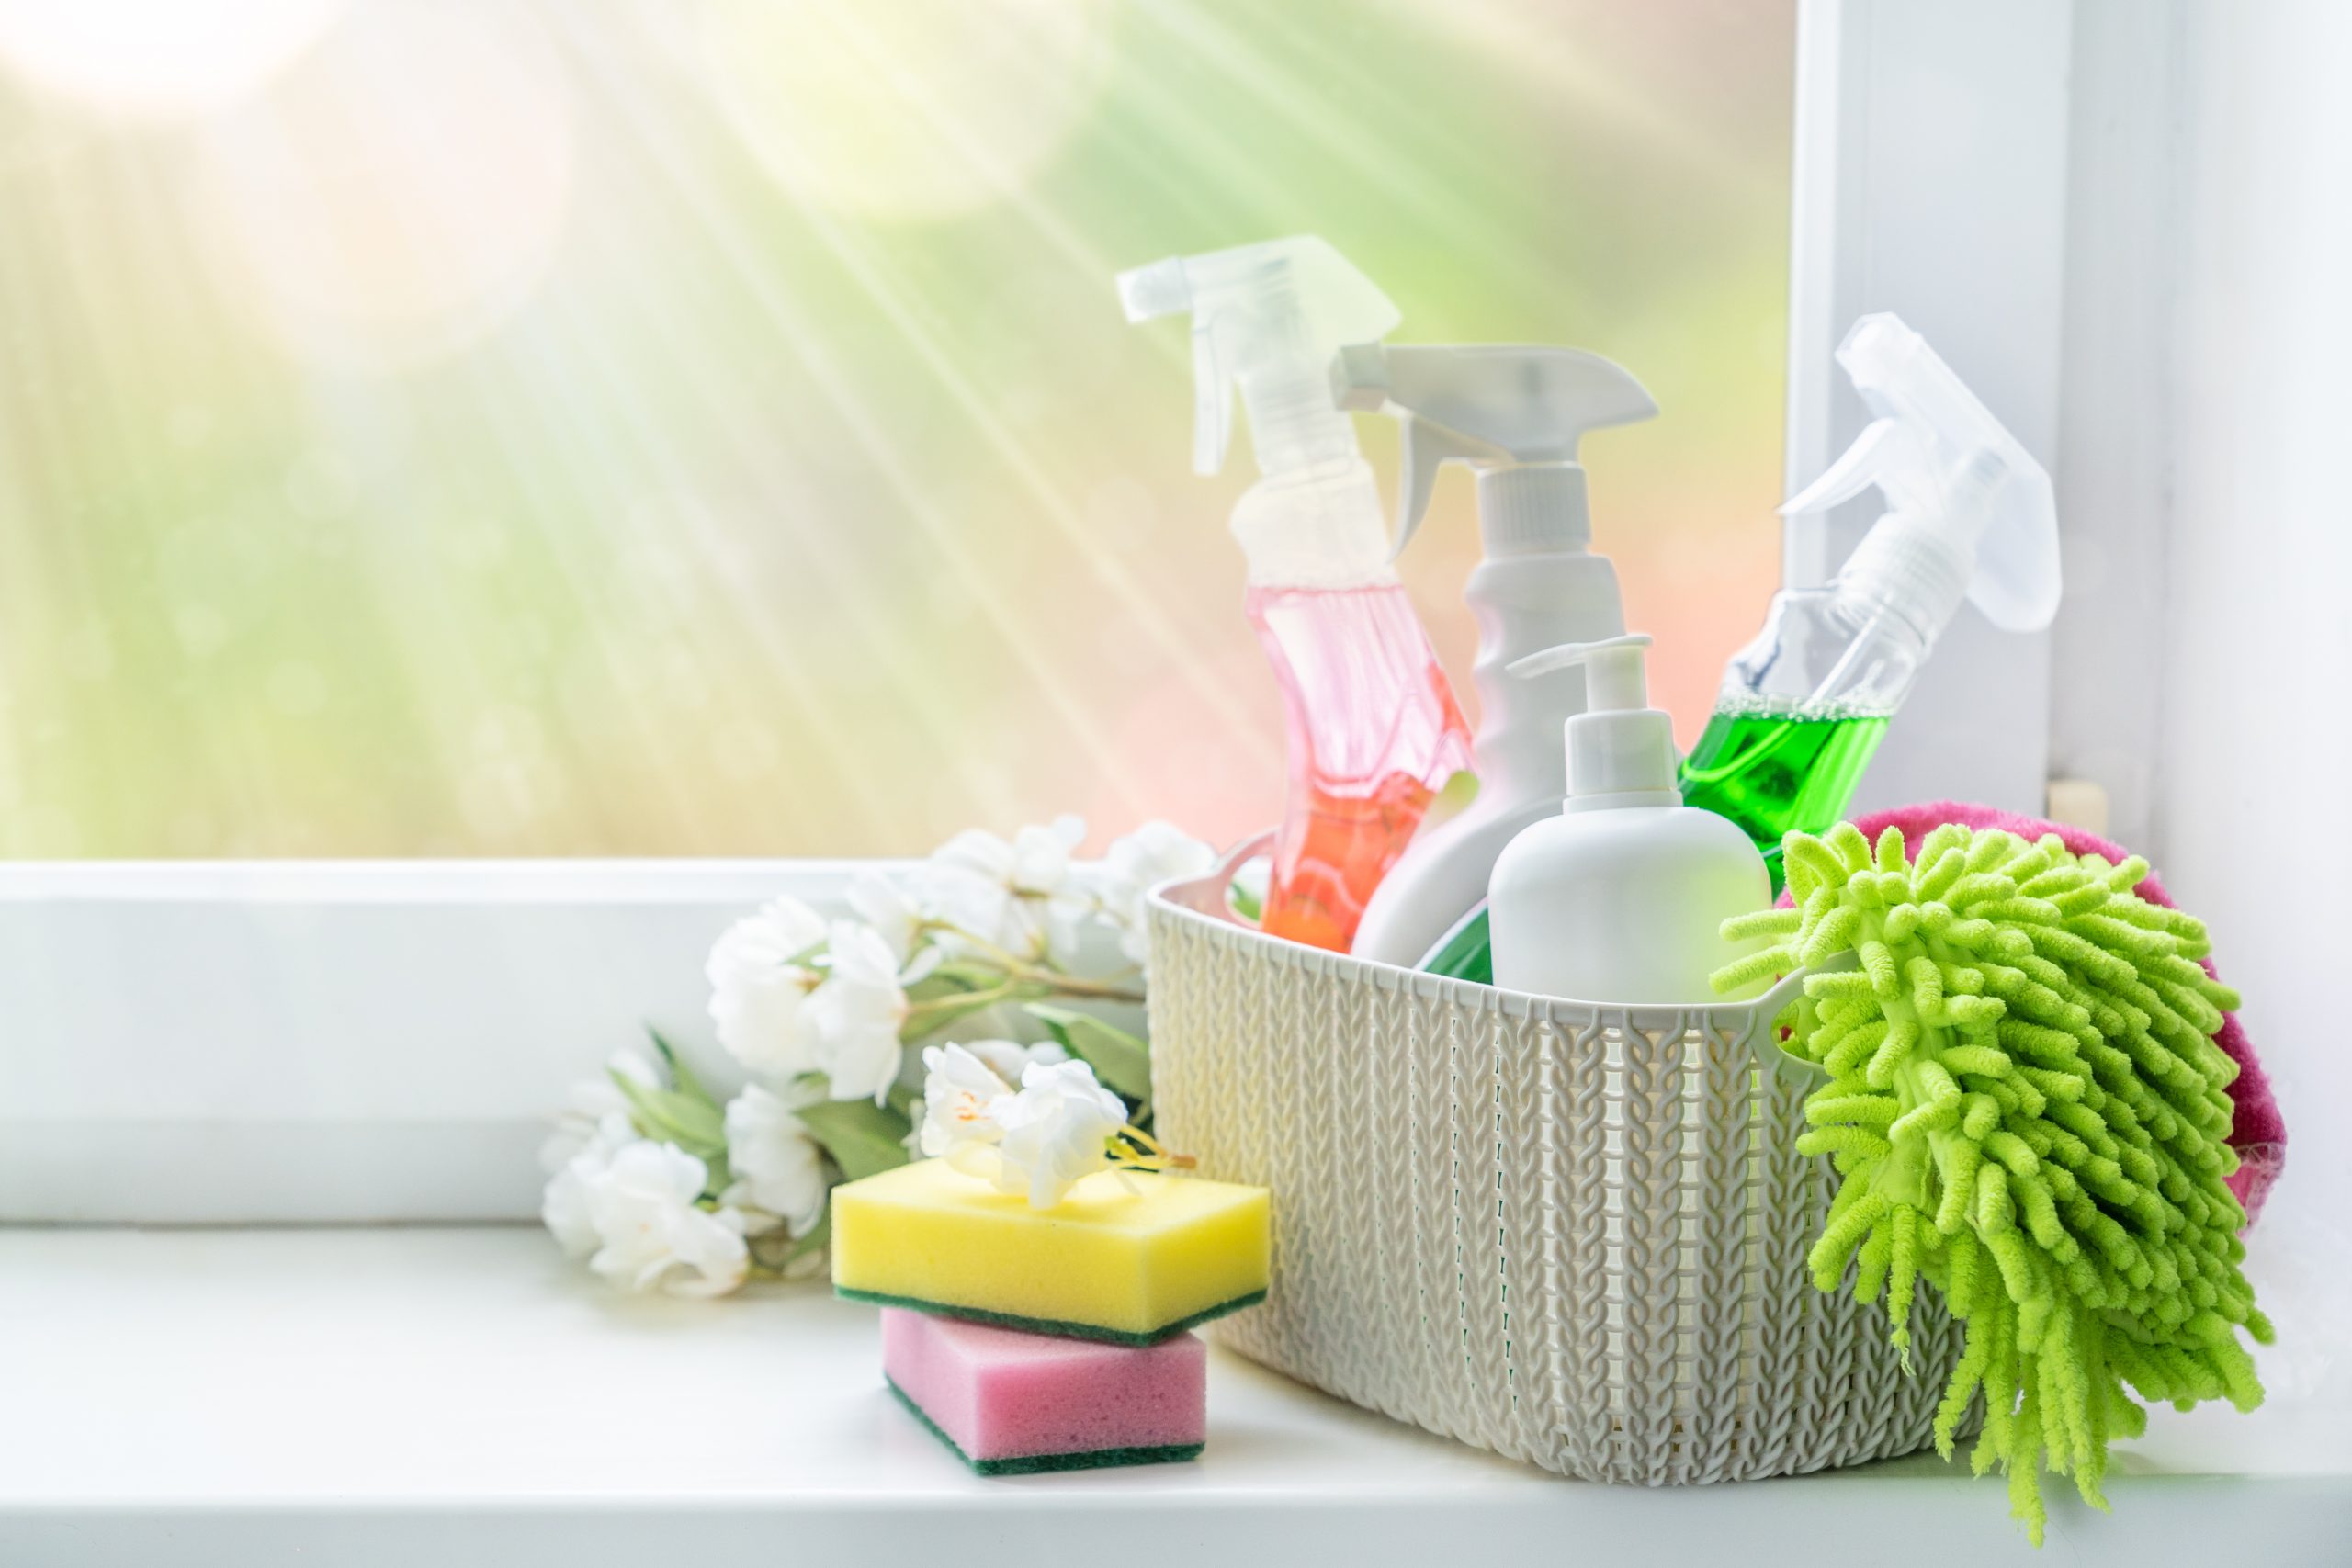 Spring cleaning concept - cleaning supplies and flowers on blur background, copy space